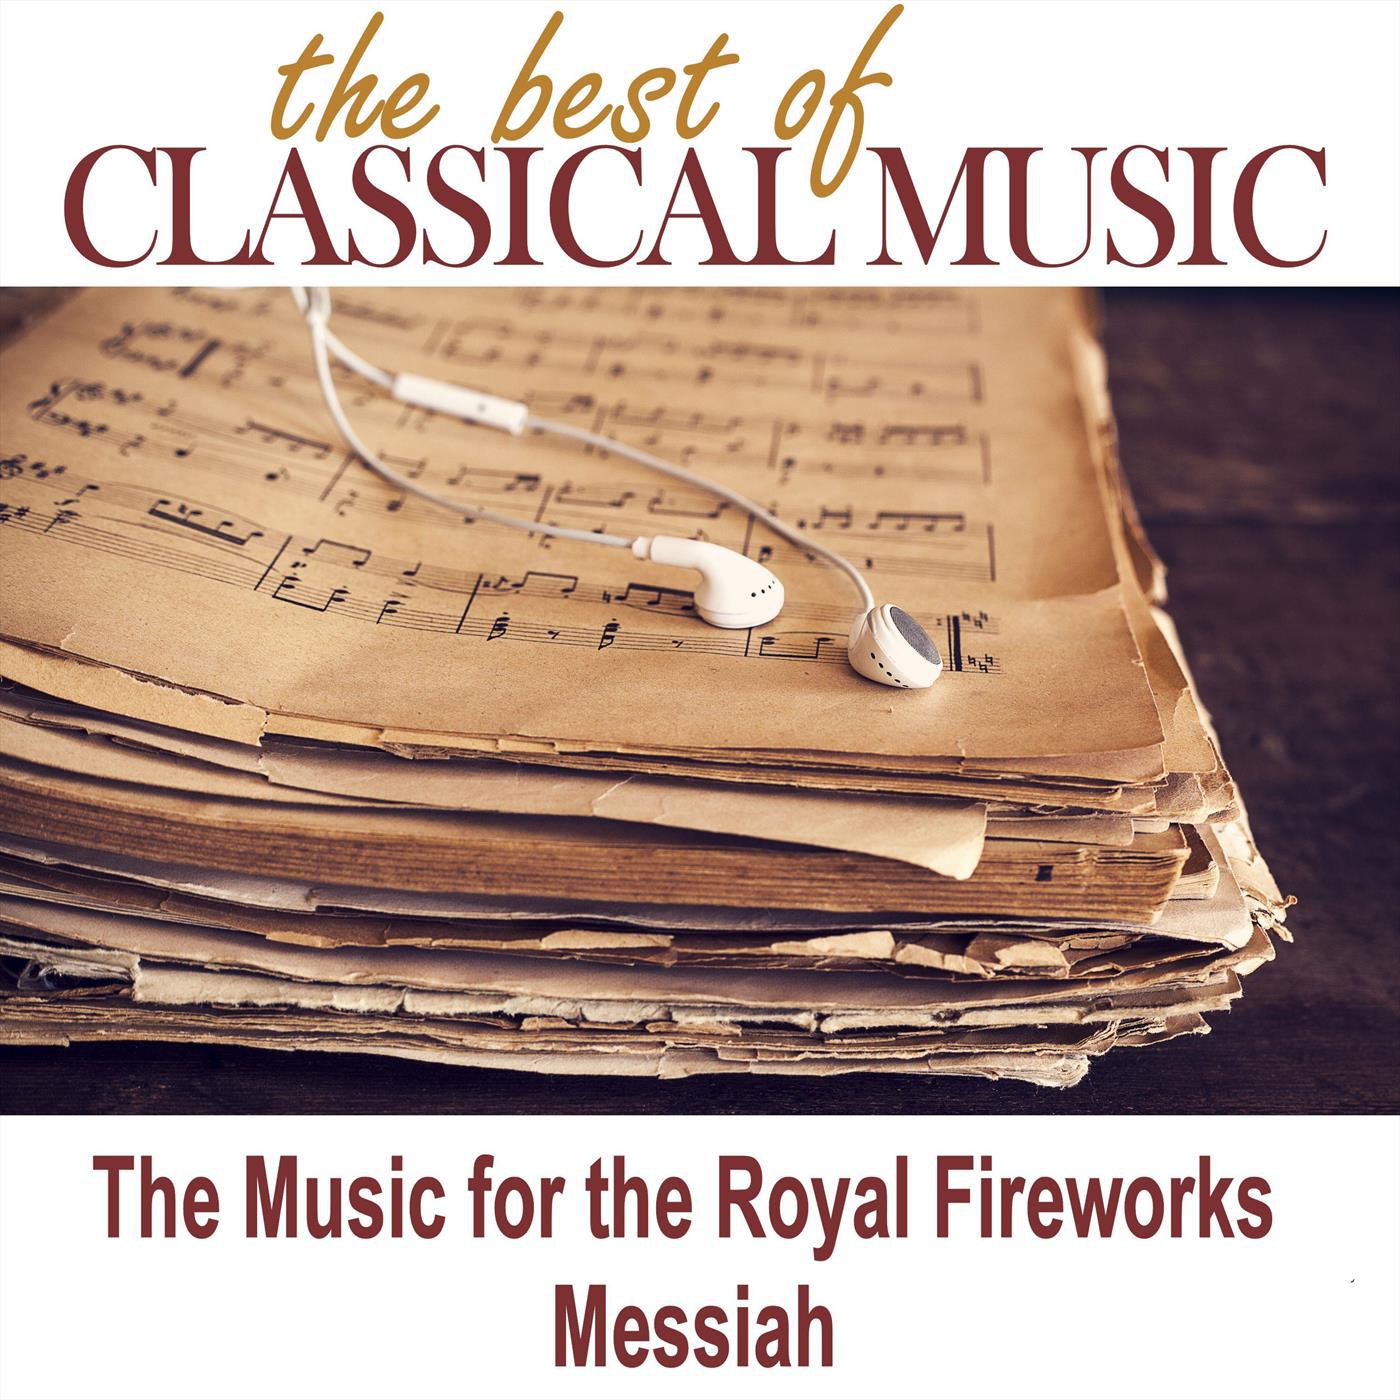 Menuett II  The Music for the Royal Fireworks  Concerto Grosso No. 26 in D major H ndel